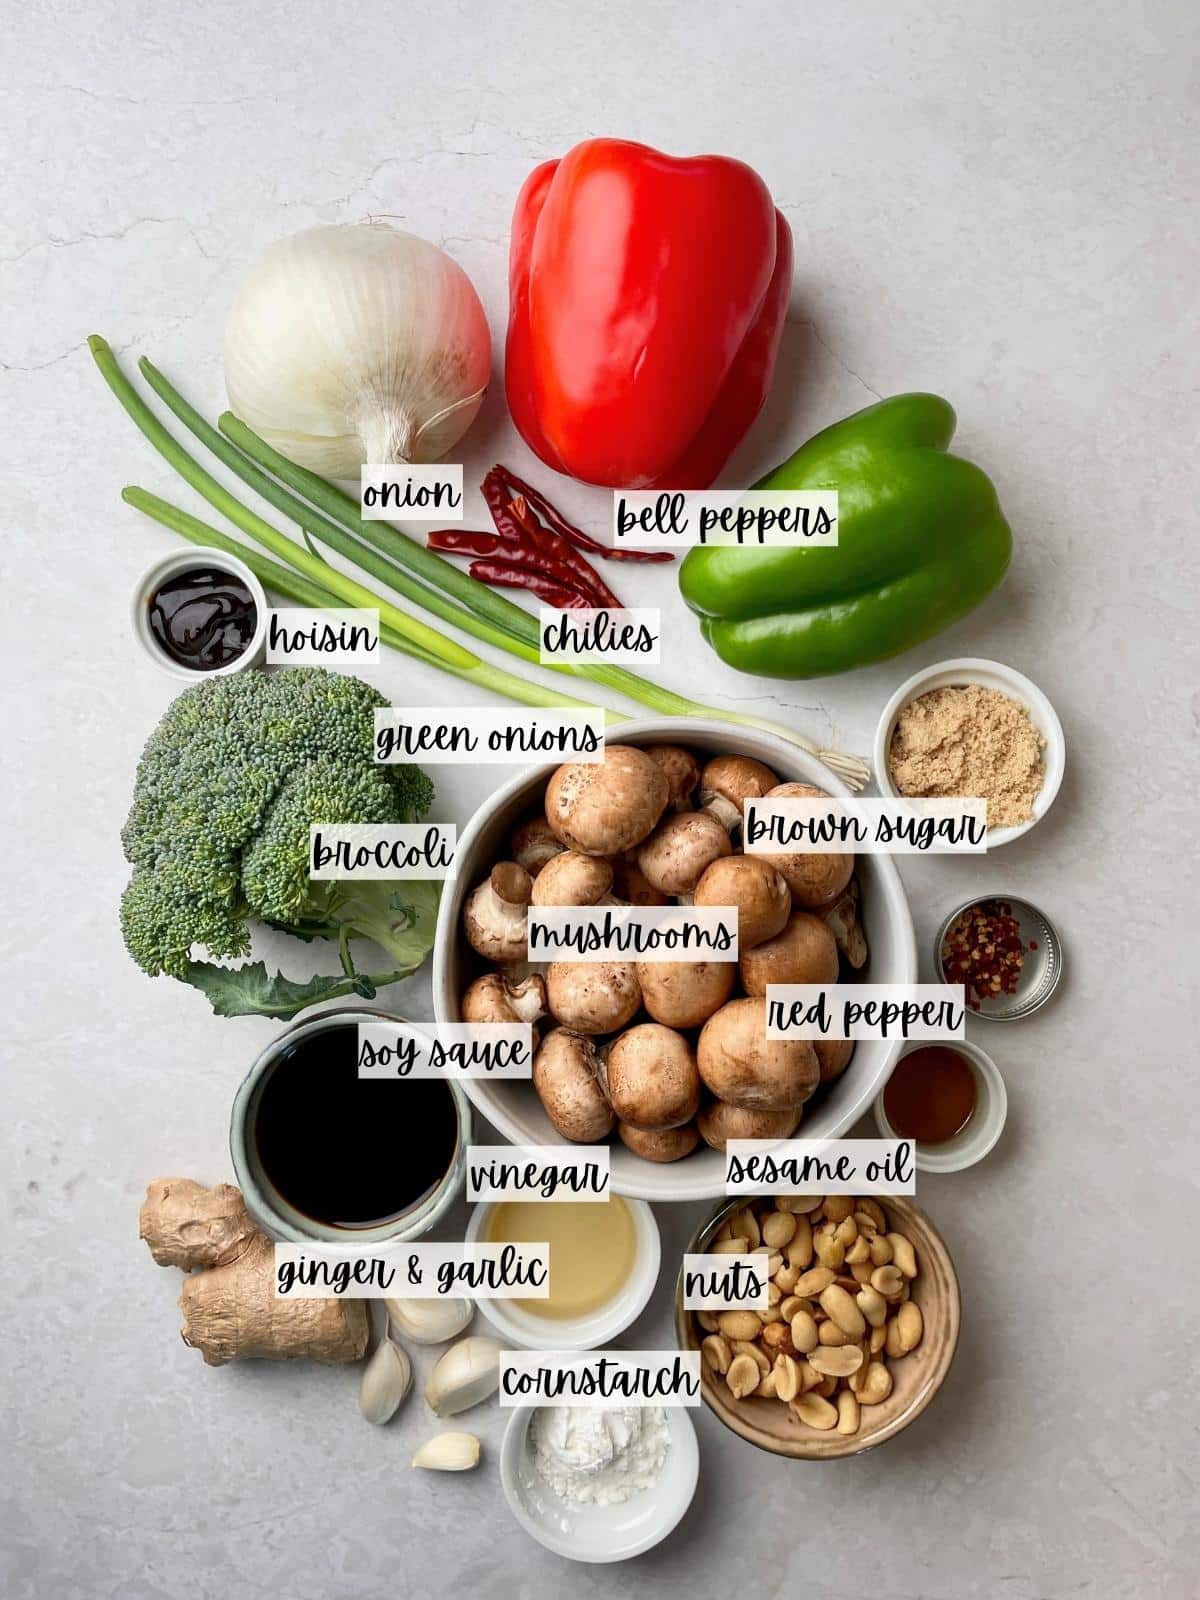 Labeled ingredients for kung pao vegetables.